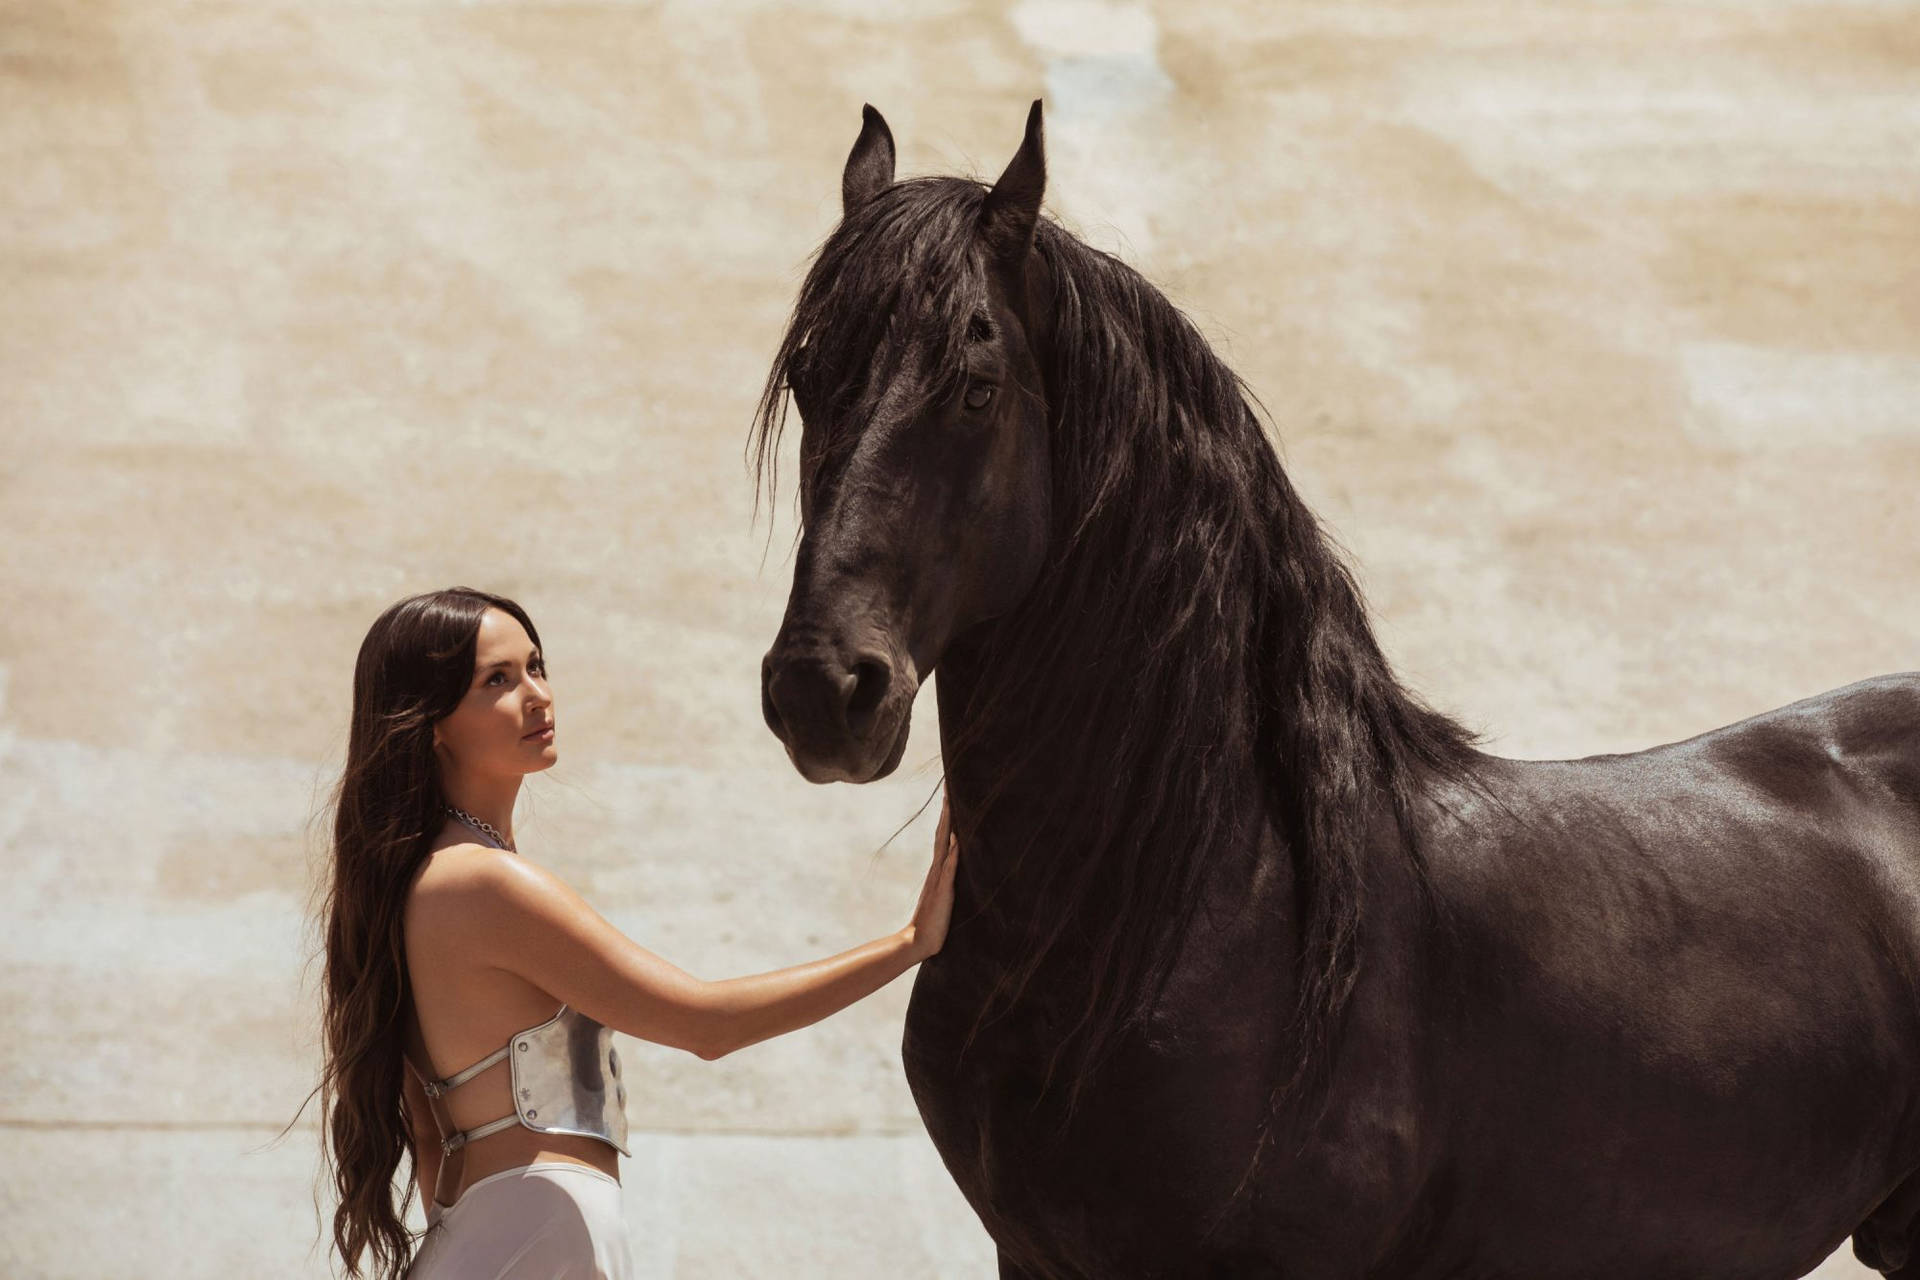 Kacey Musgraves With Black Horse Background